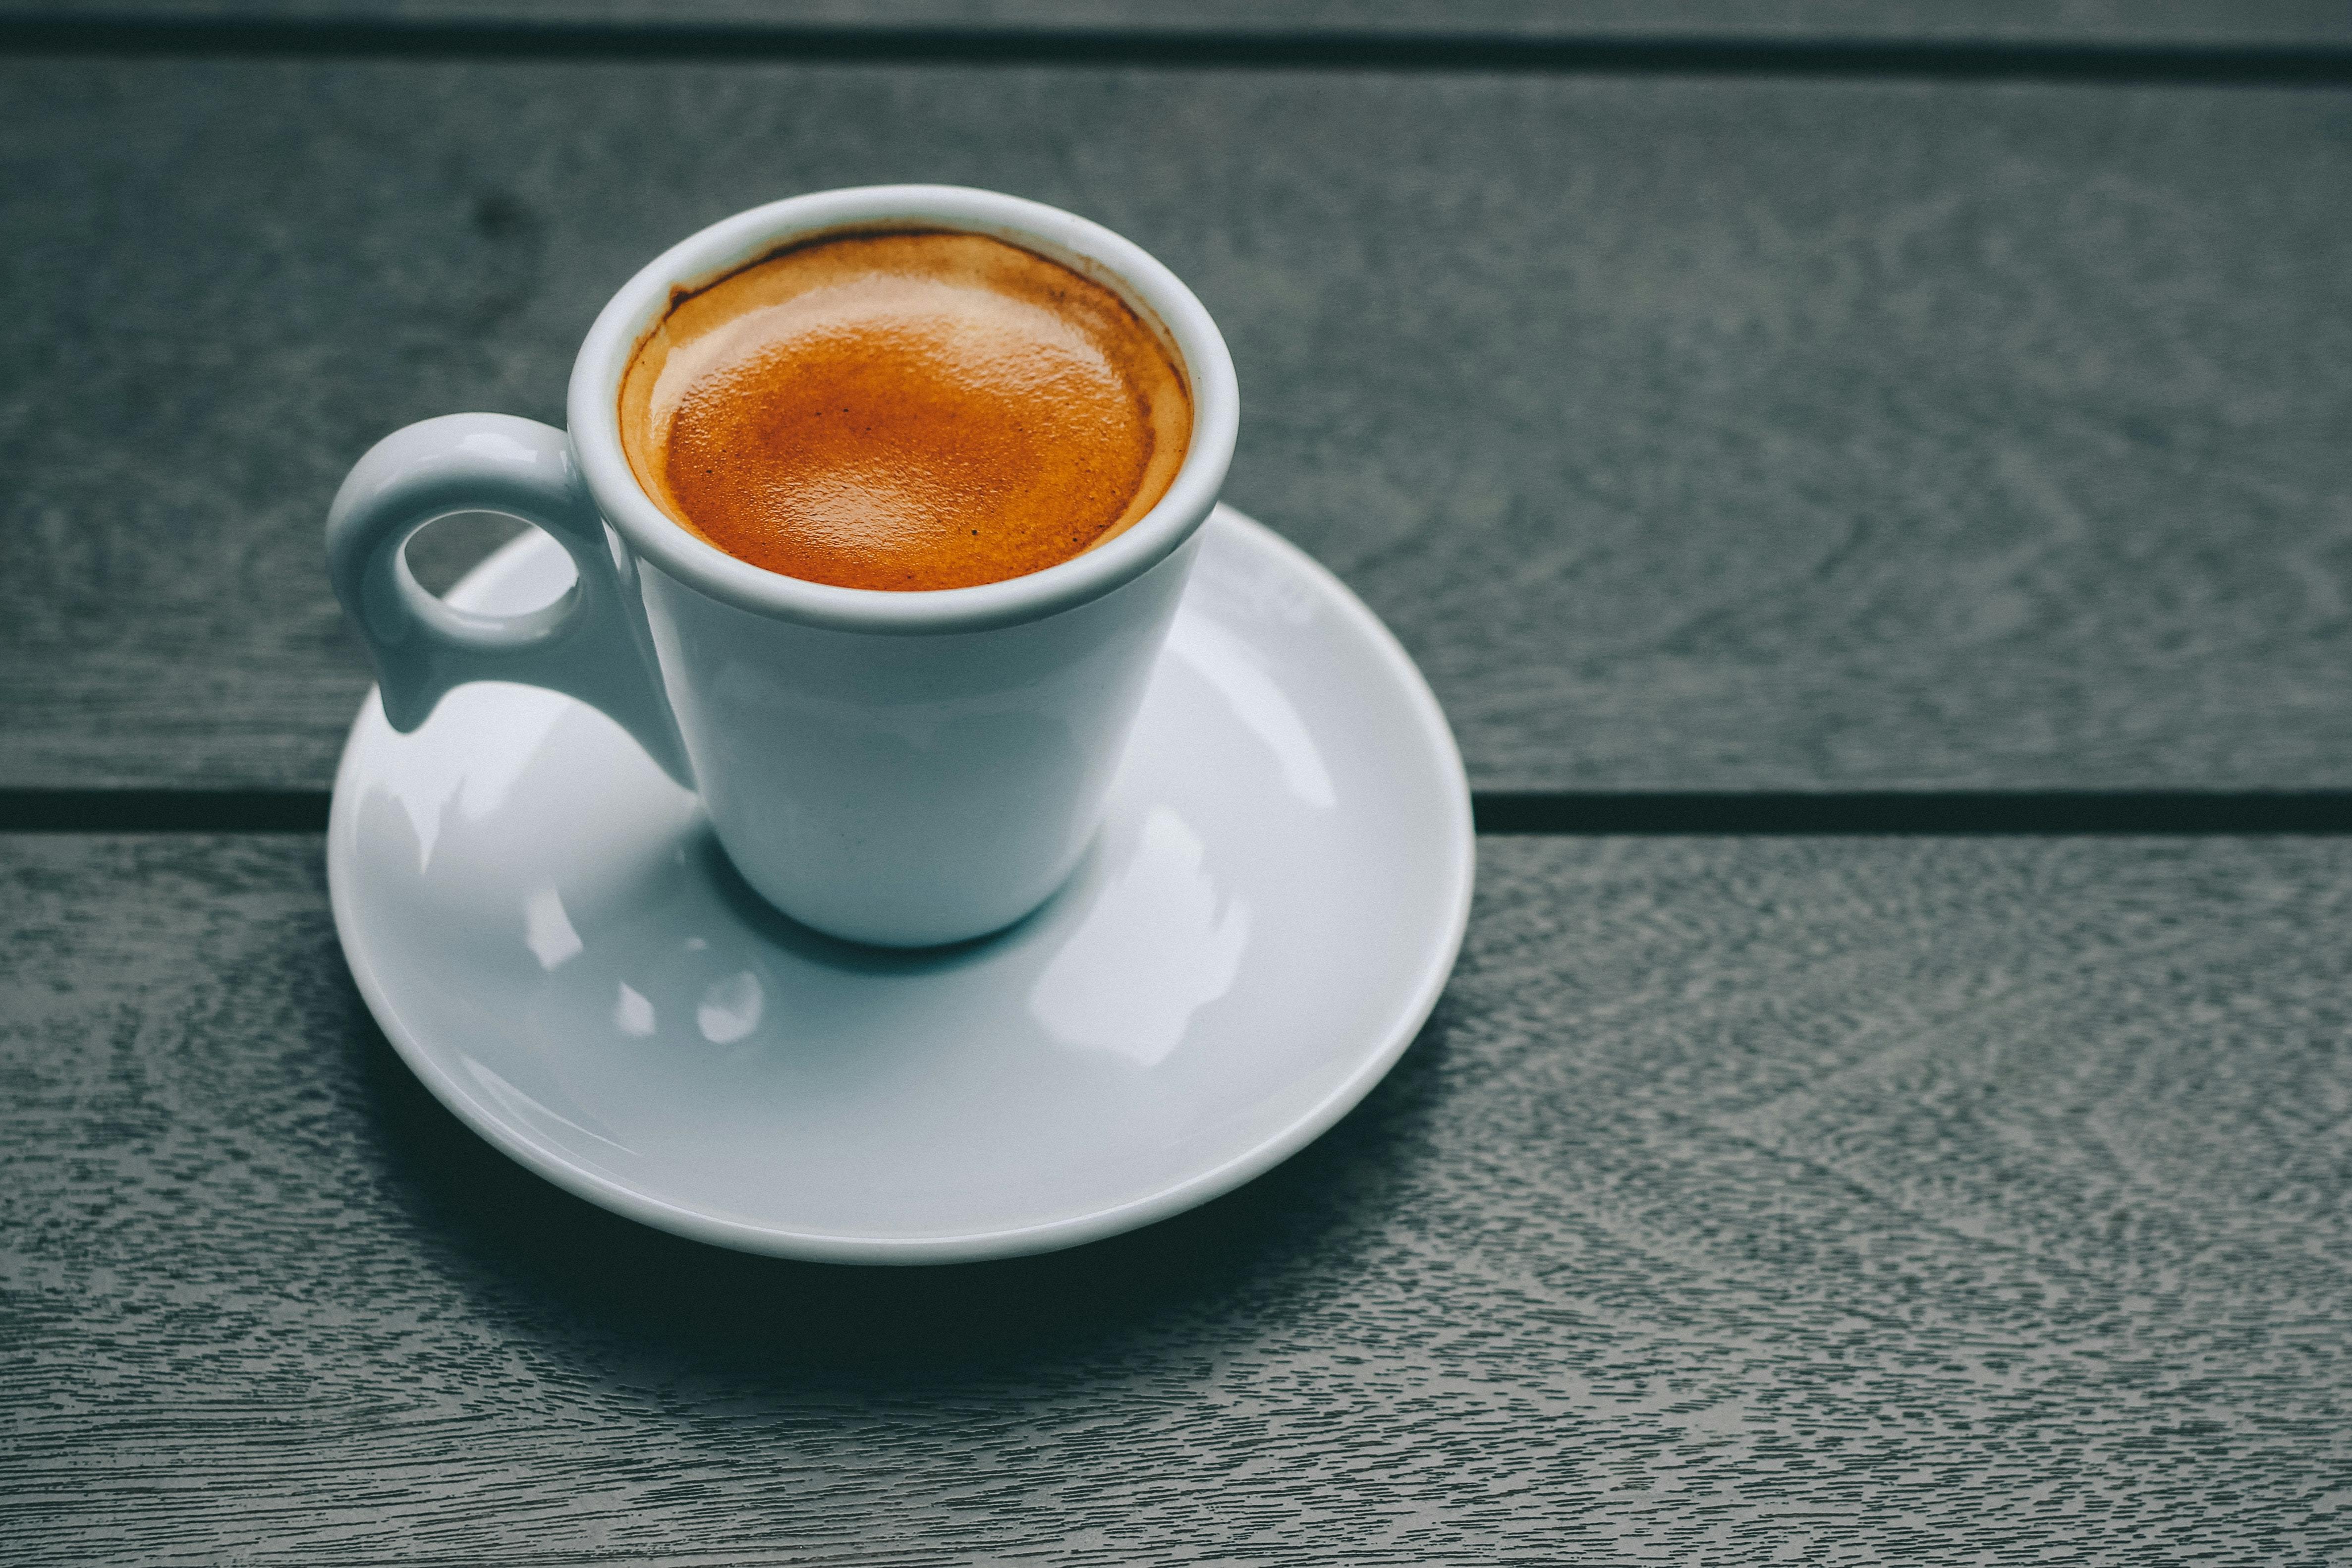 Espresso Cups: A Guide to the Best Types of Coffee Mugs and